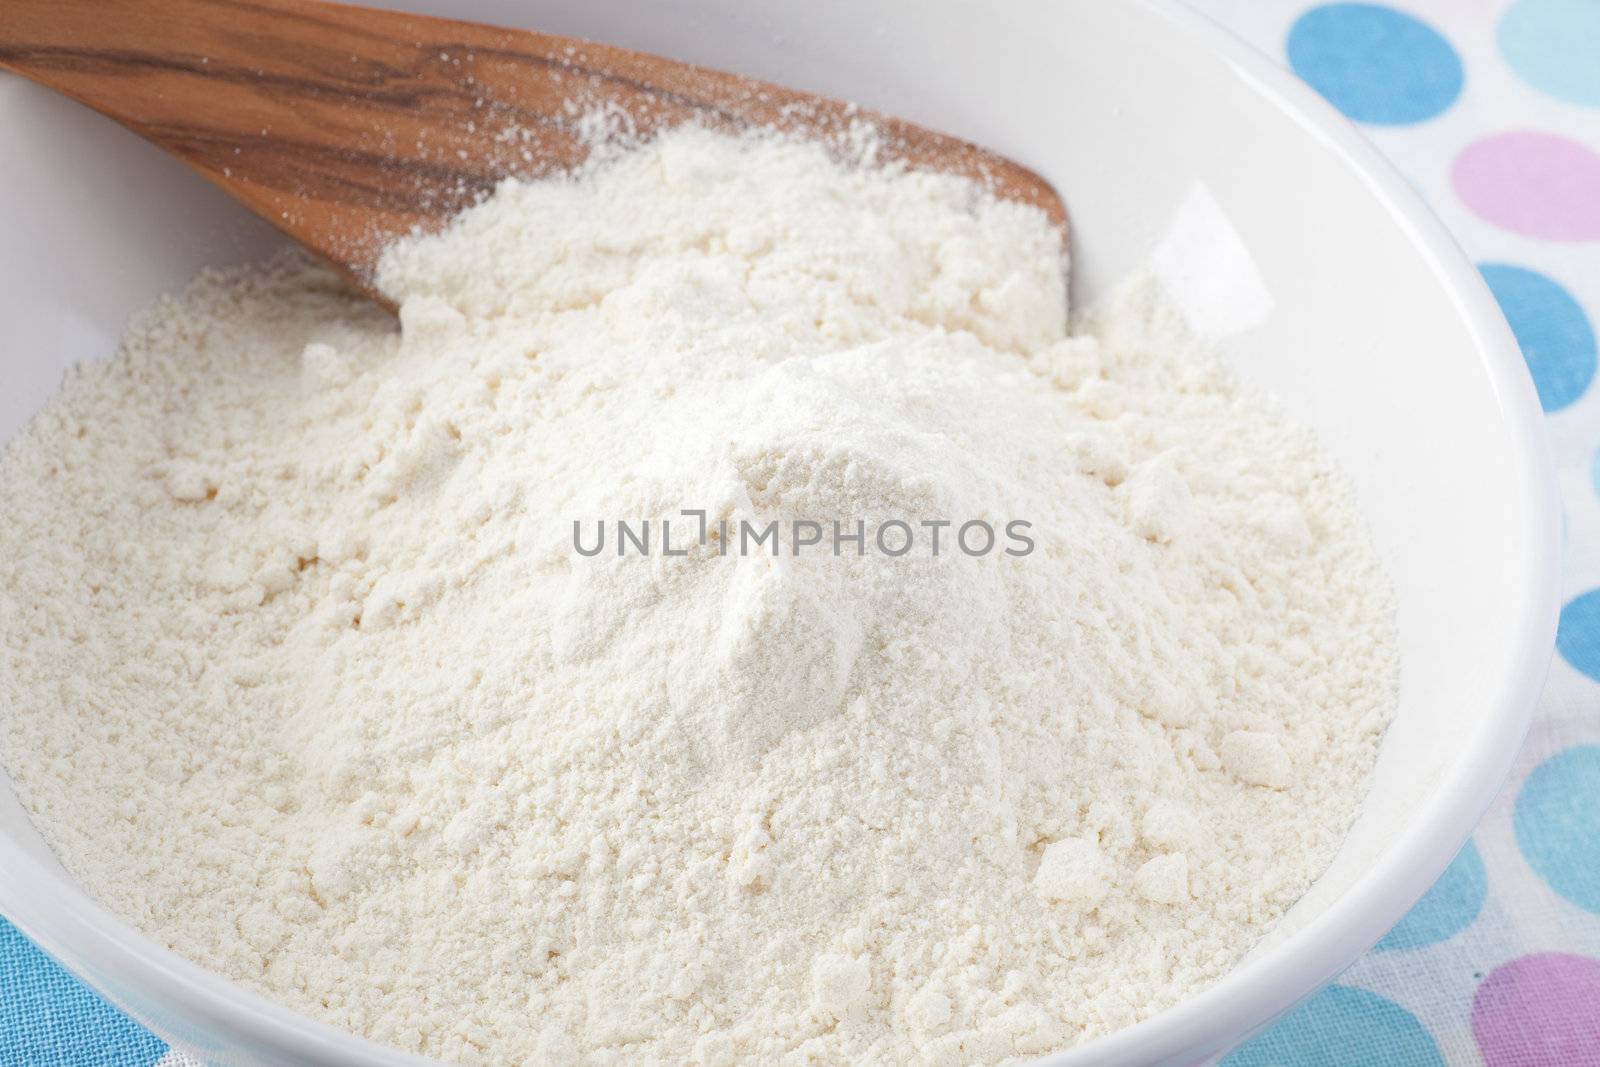 Bowl of flour ready for the next ingredients.